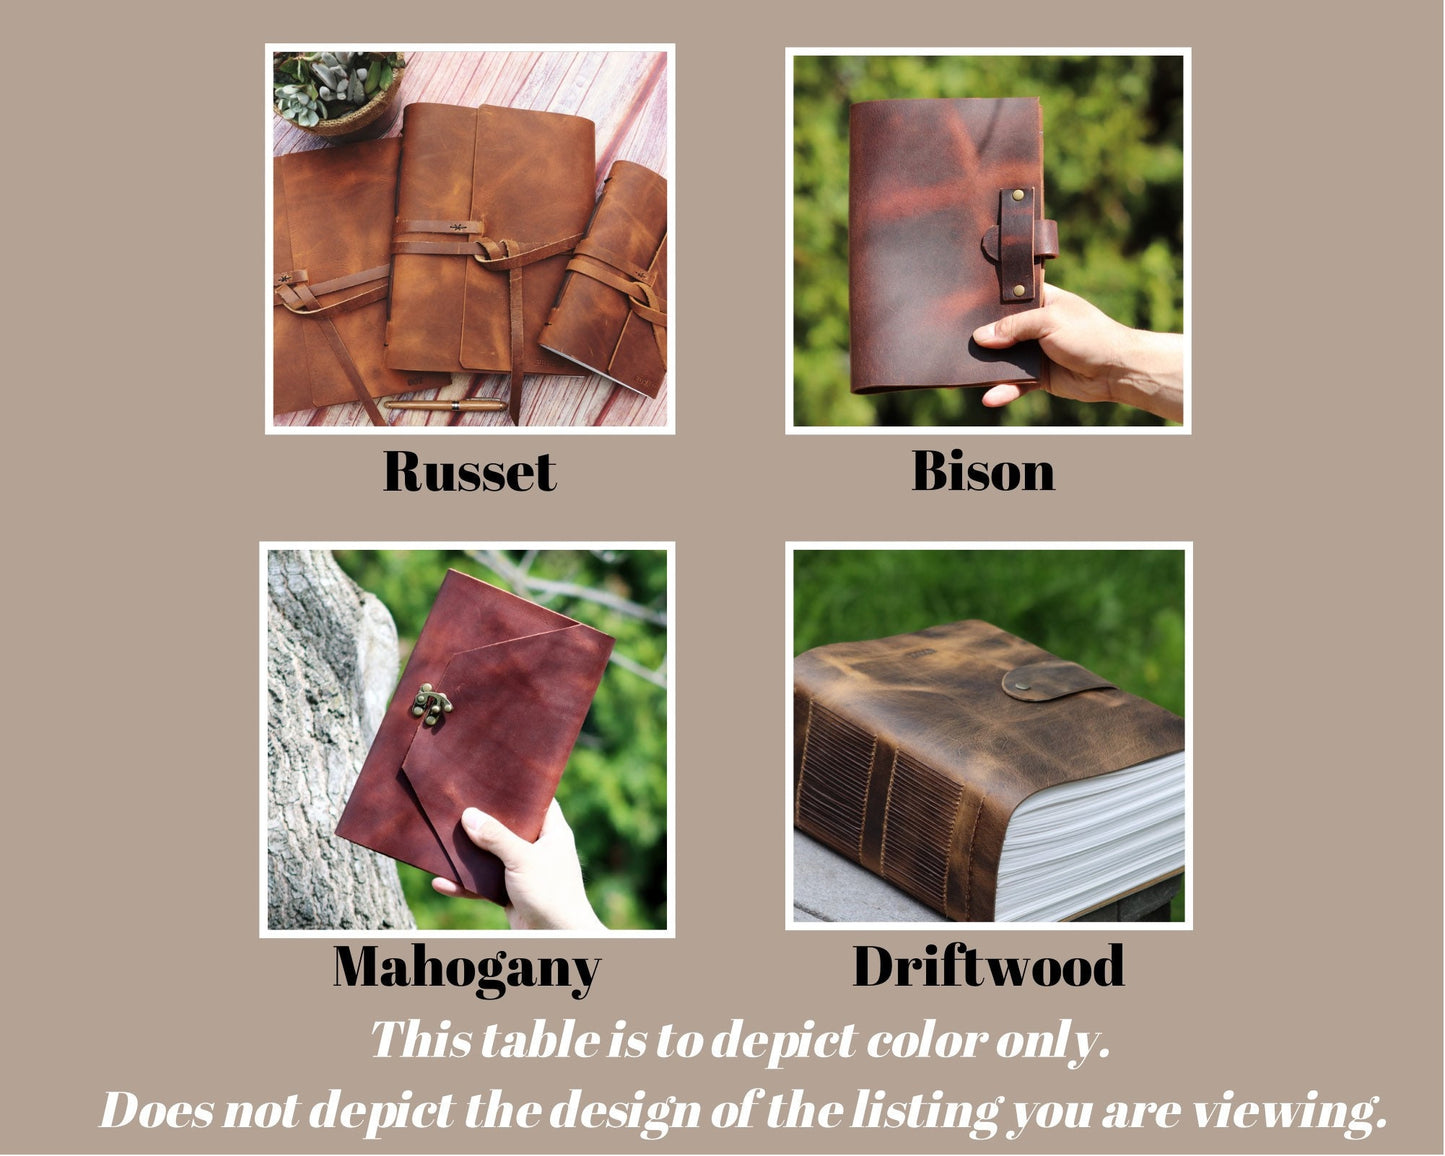 THE MINI MASSIVE - Giant Leather Family Tome, Big Huge Rustic Heirloom Keepsake Book, Sewn in Premium Leather, Personalized Christmas Gift